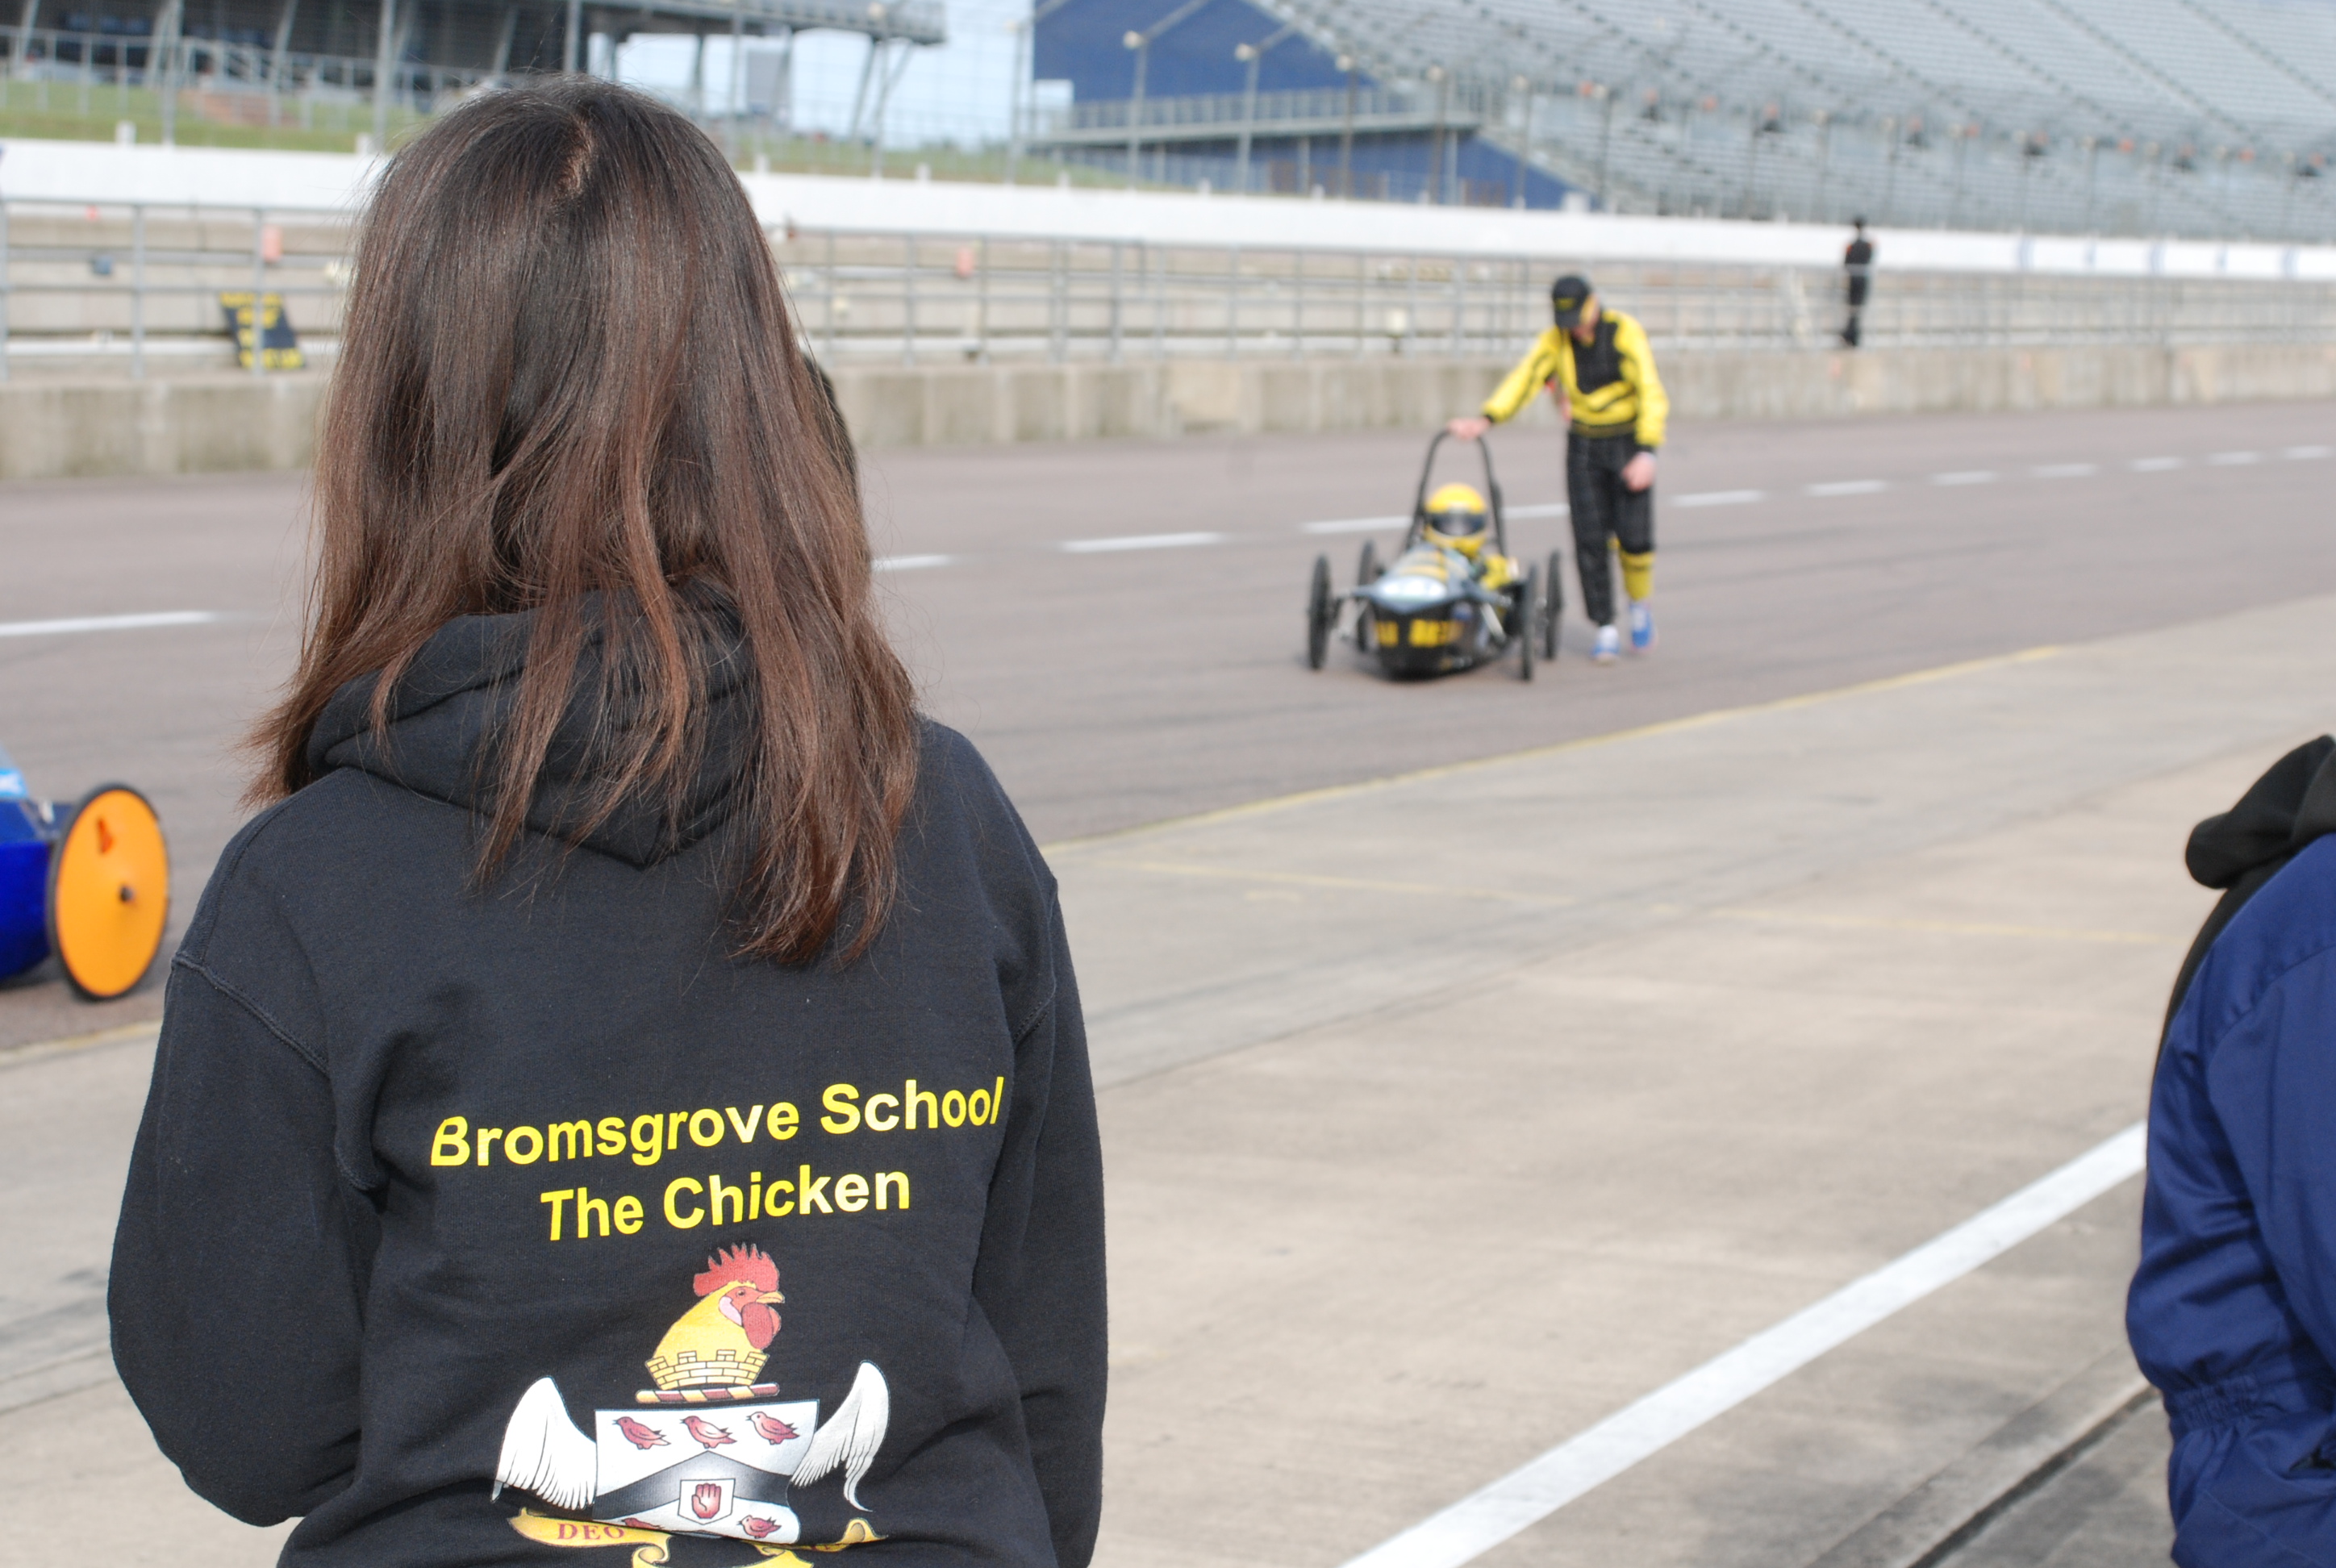 'The Chicken' Electric Car team competing at the Rockingham Finals, 10th-11th October 2015